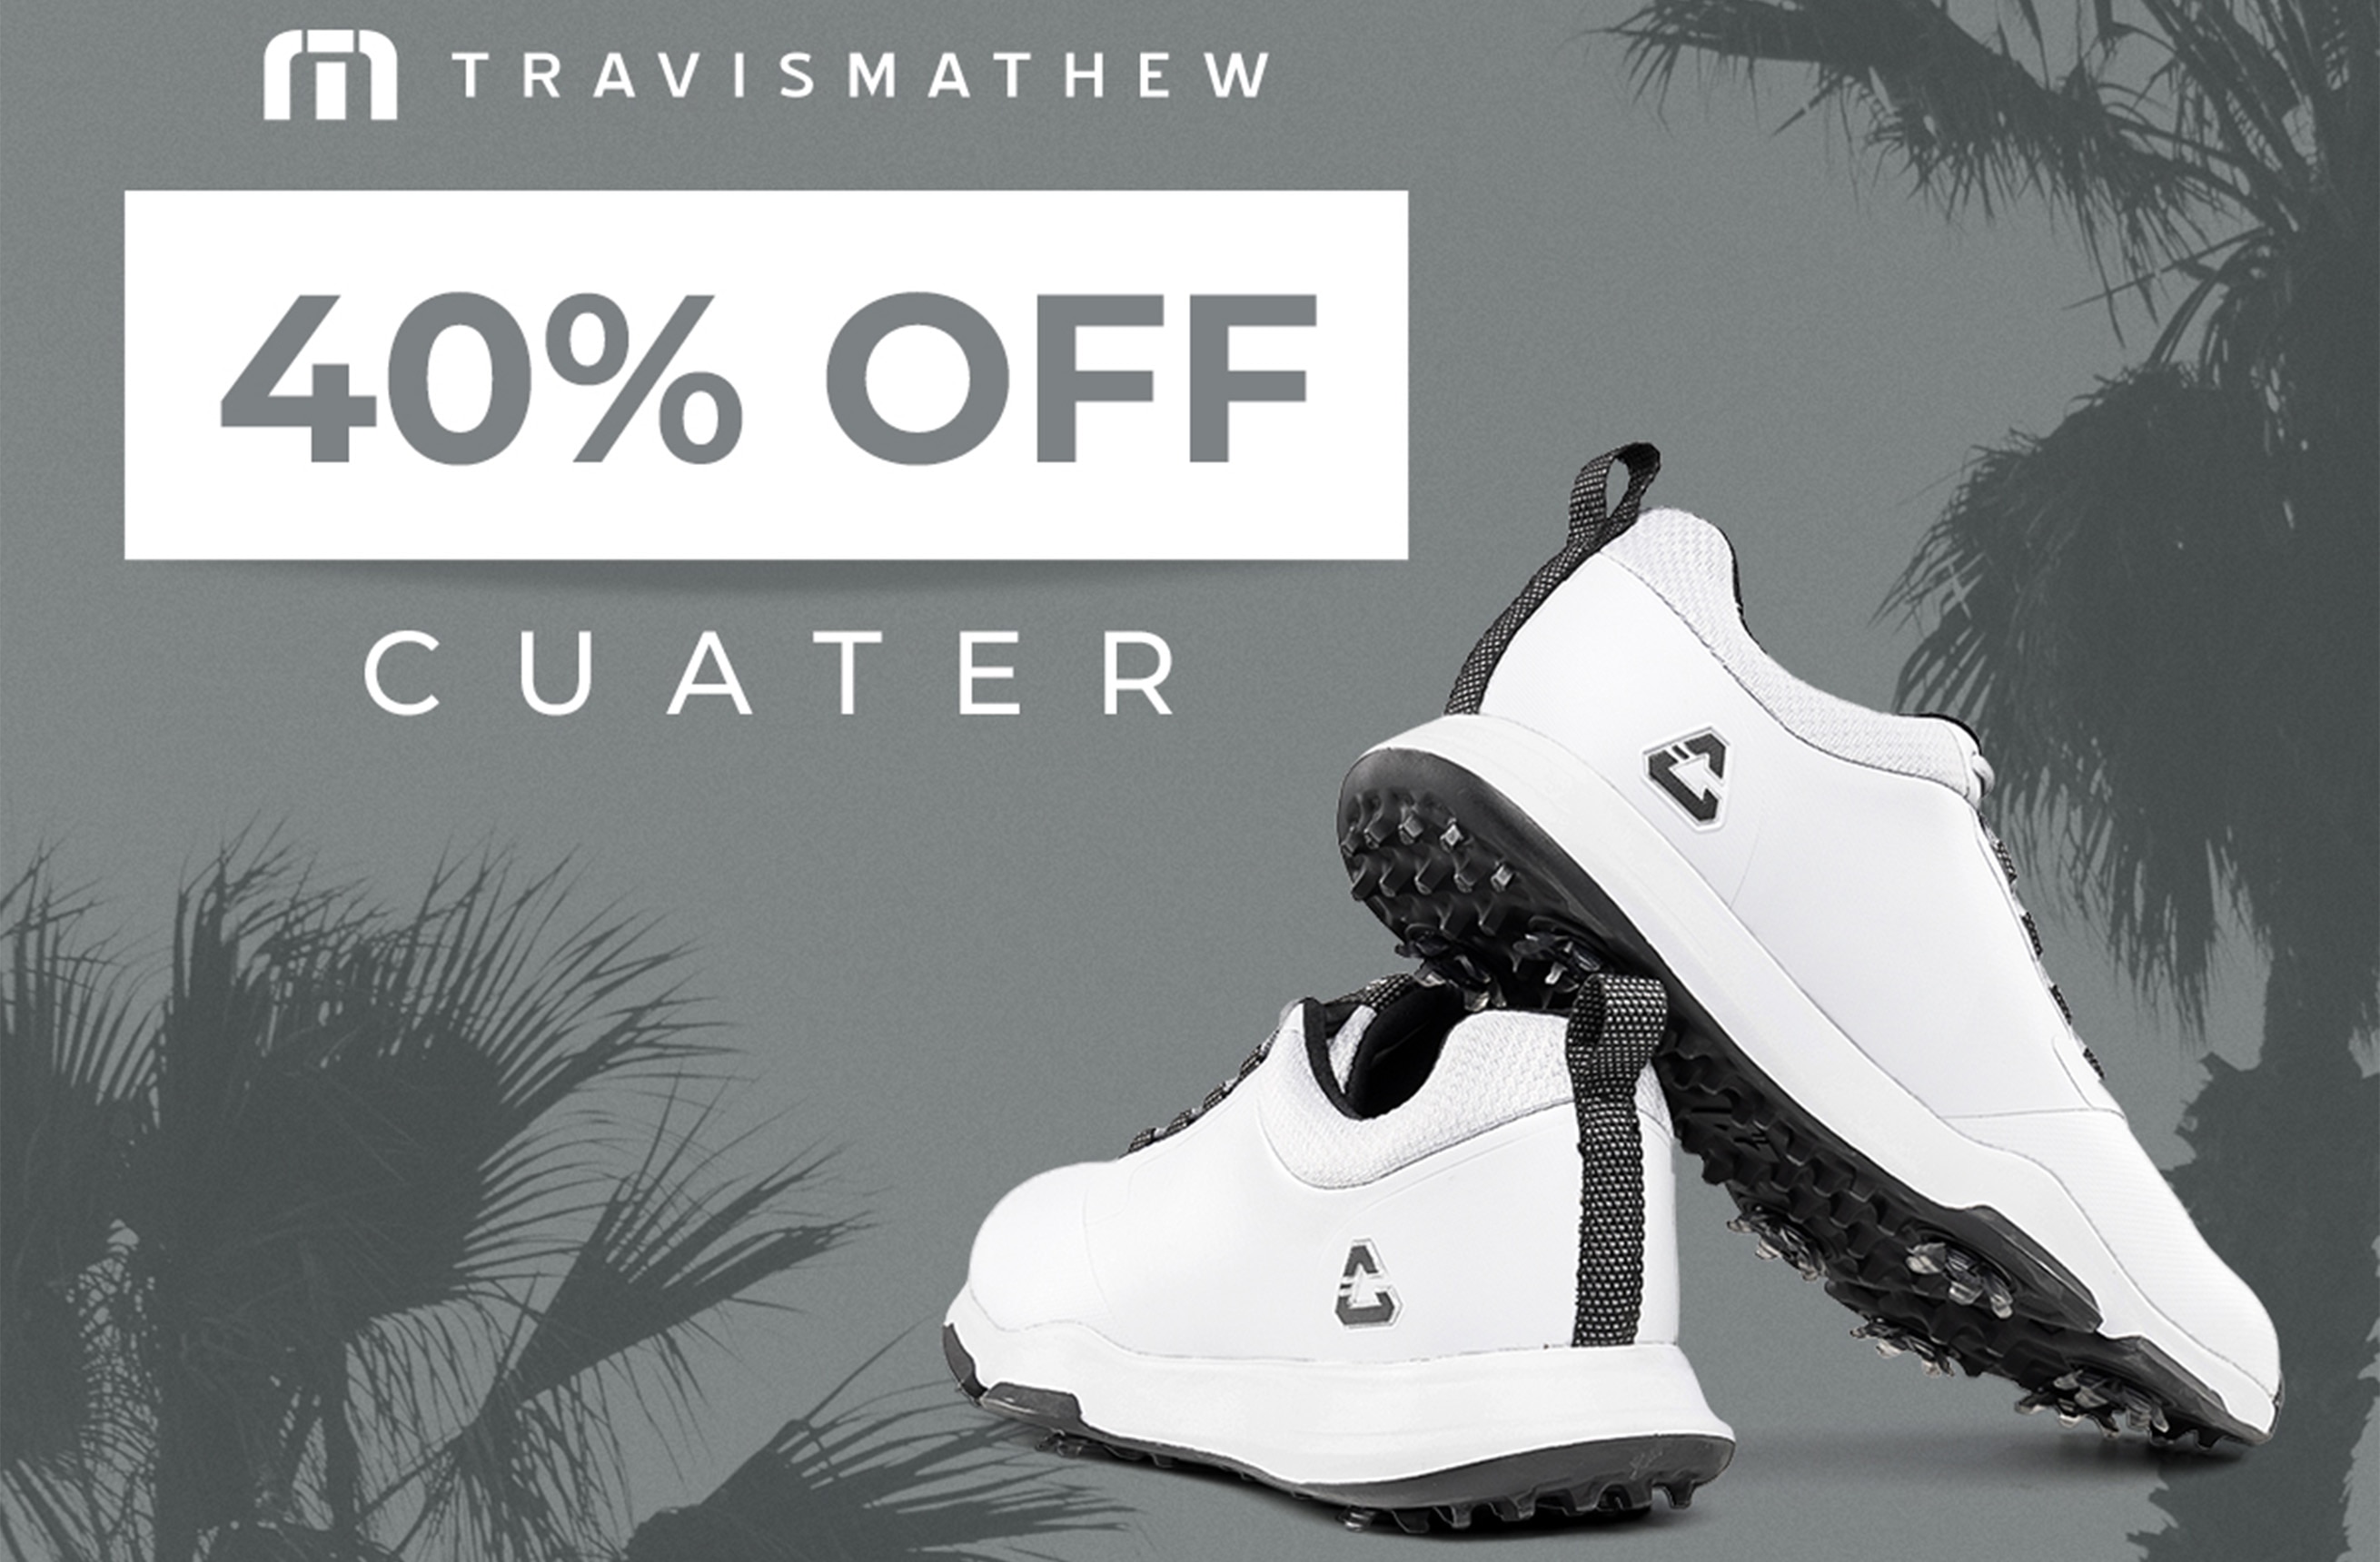 40% OFF CUATER